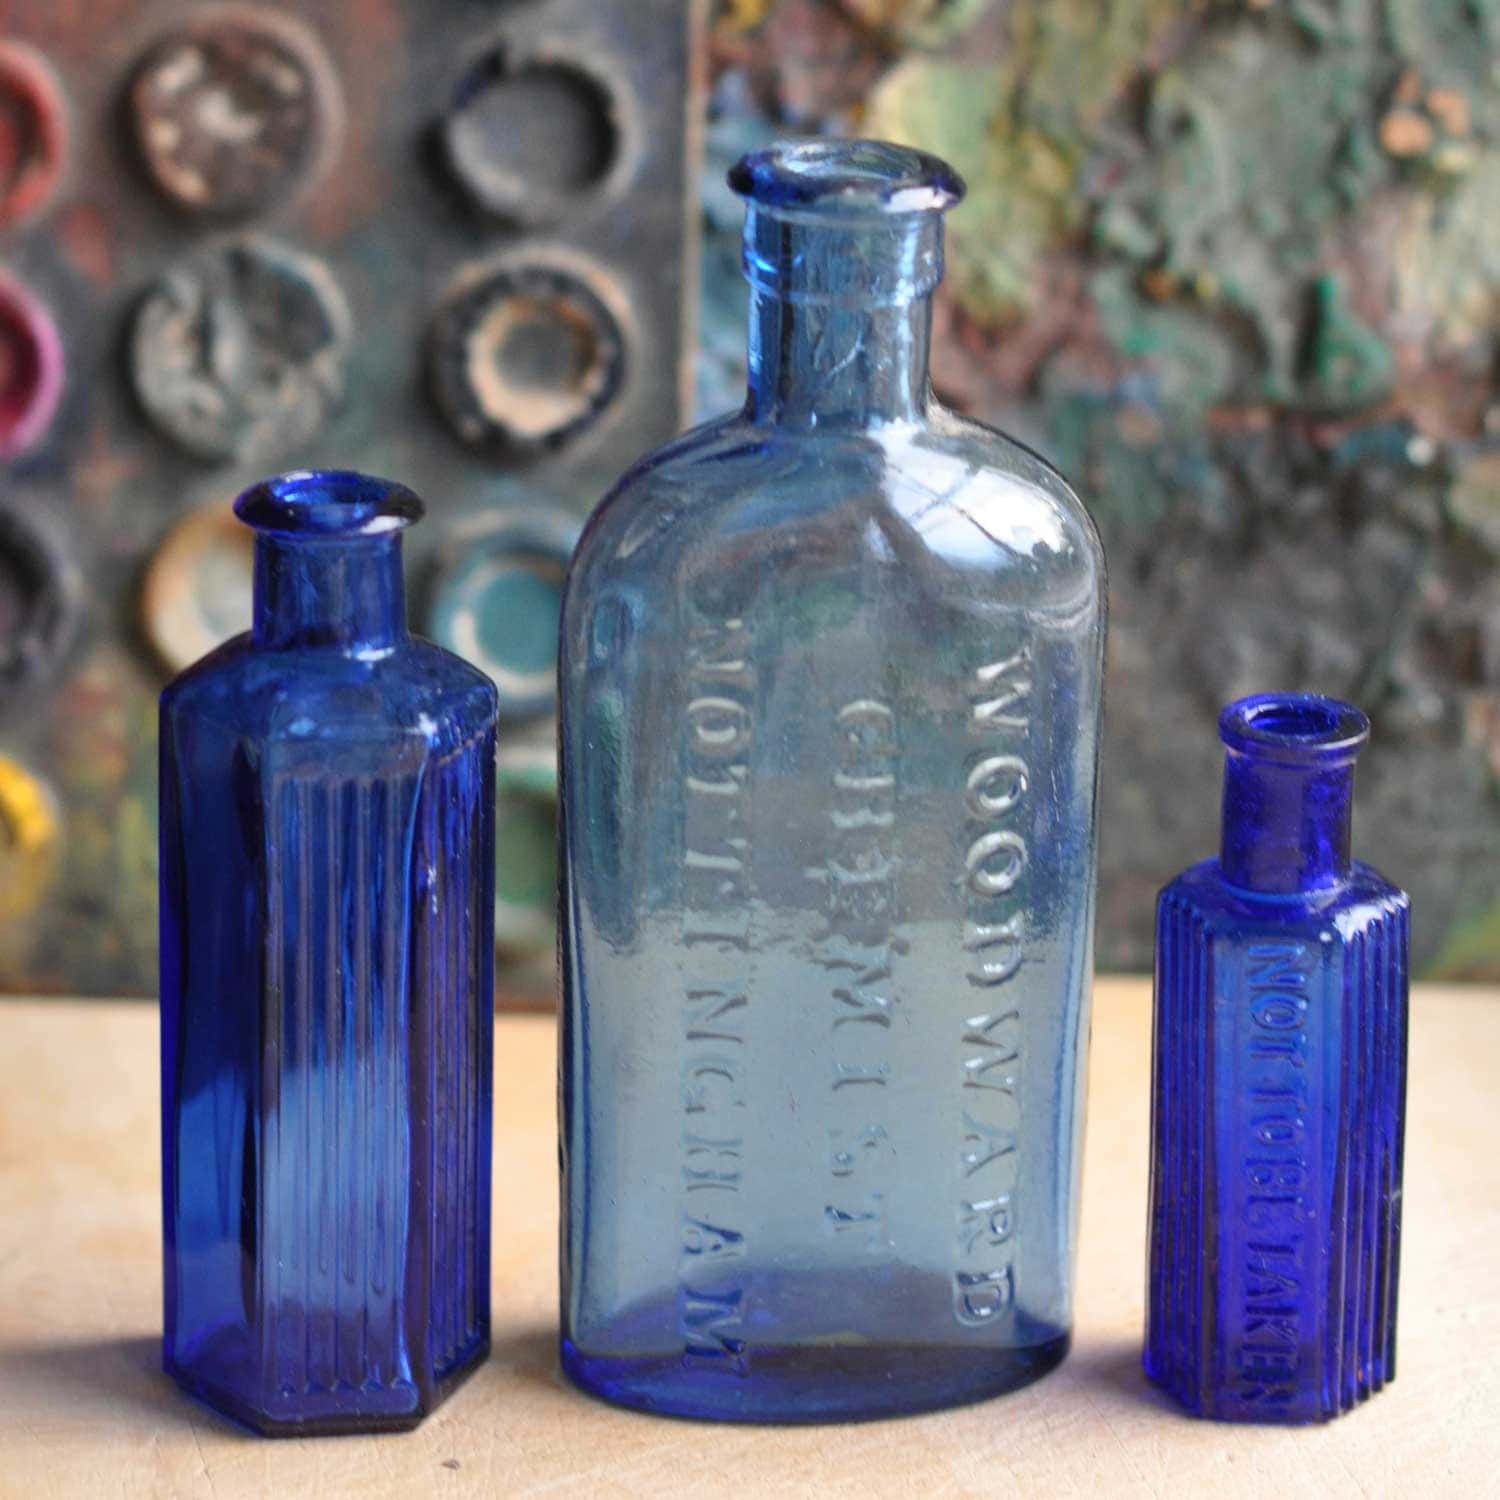 Three Blue Glass Bottles On A Table